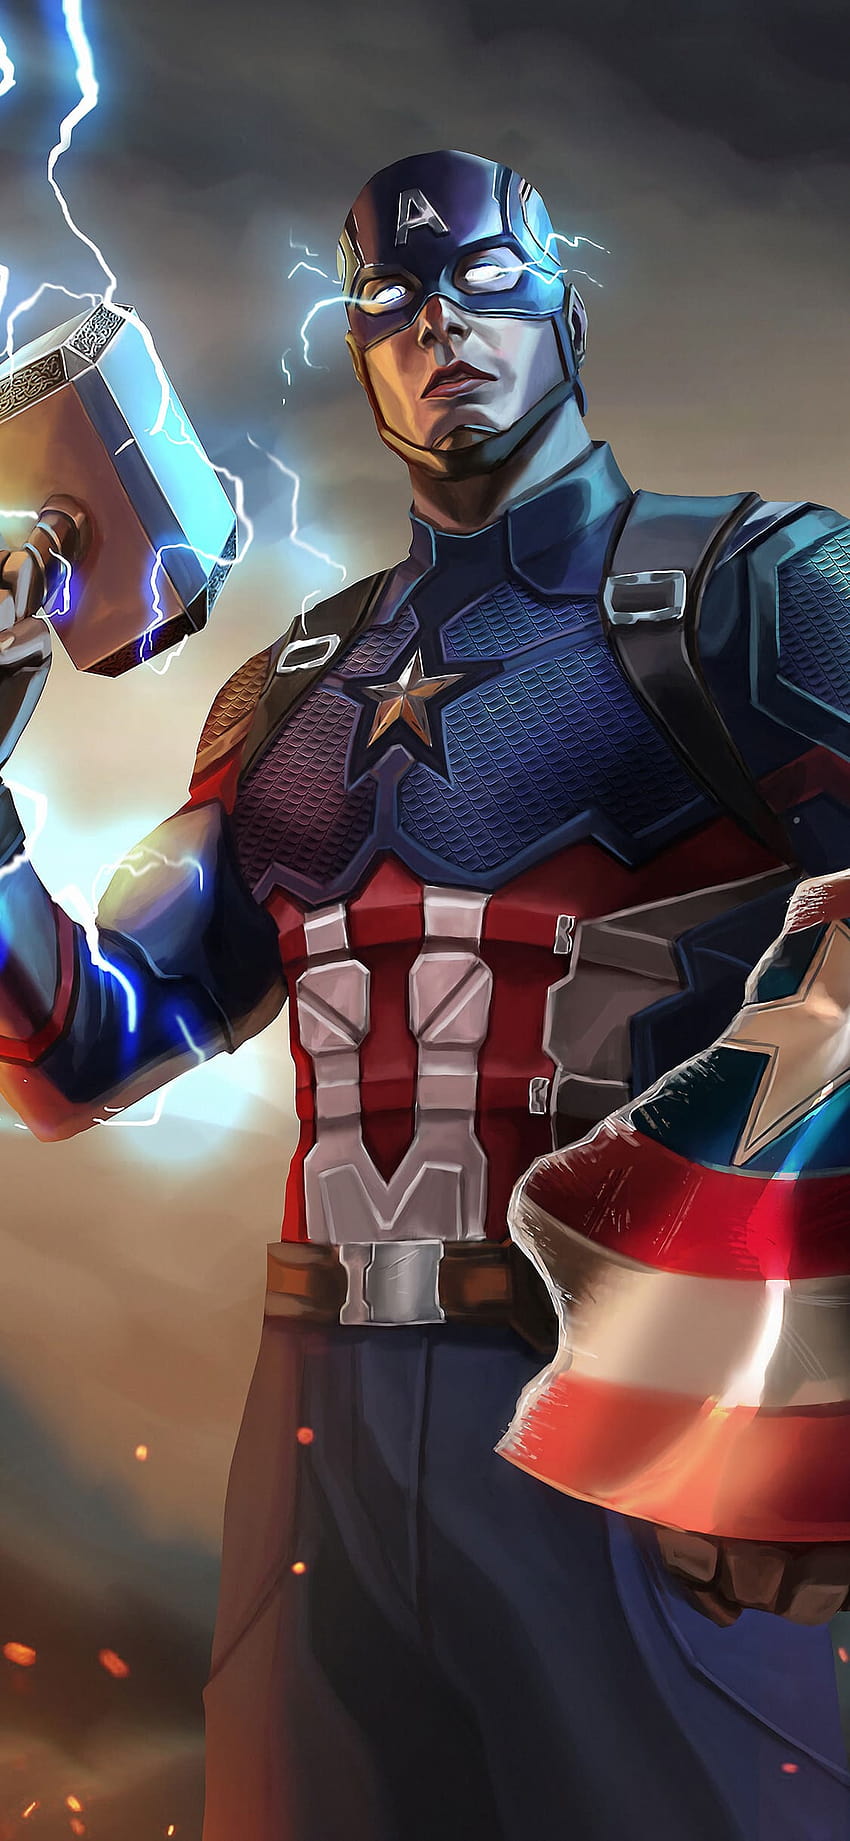 Captain America Android Wallpapers Androidwalls  Captain America Wallpaper  Android Hd  1080x1920 Wallpaper  teahubio